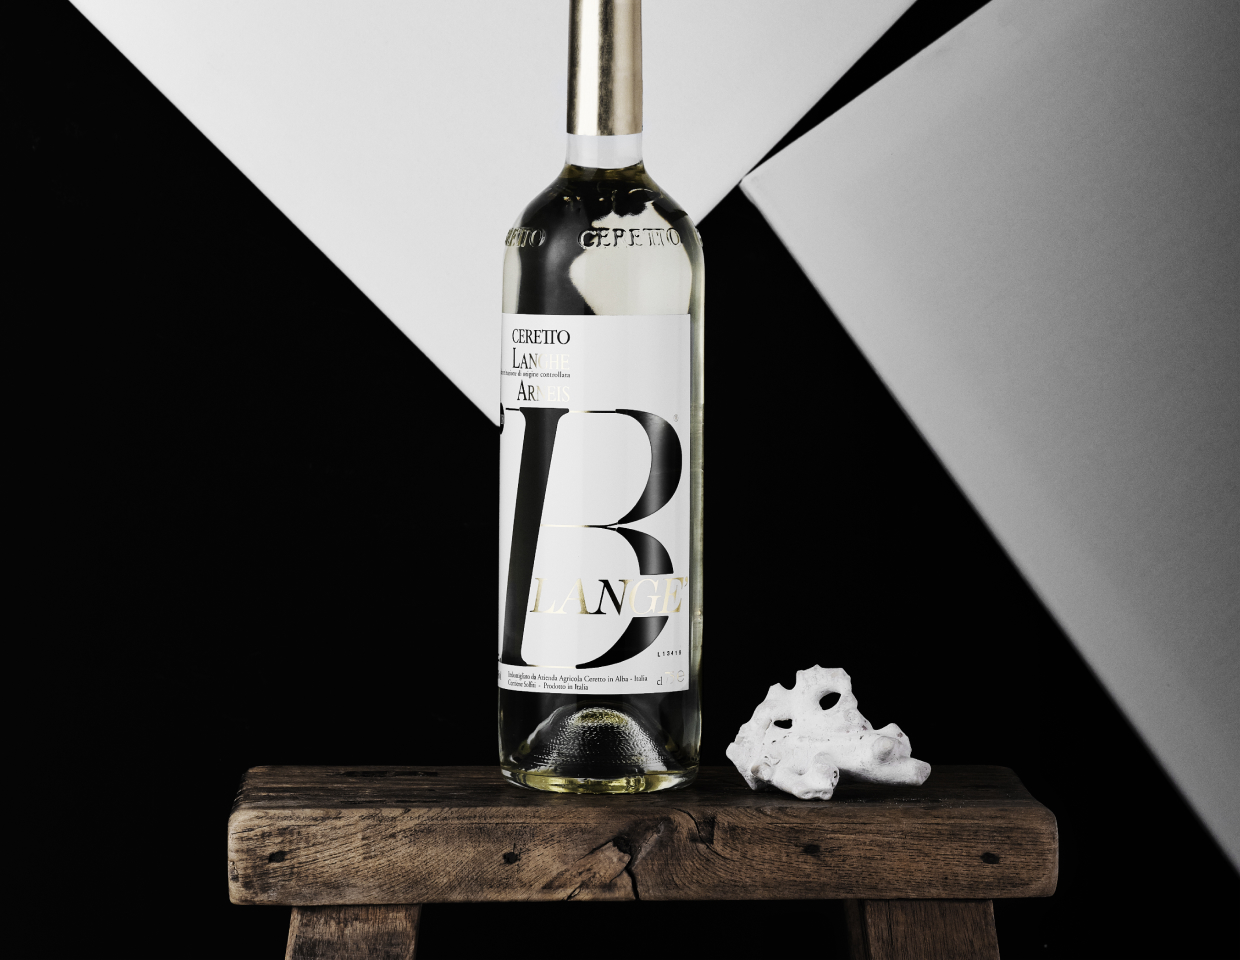 Ceretto Arneis Blange bottle on wooden table in from of a geometric wallpaper